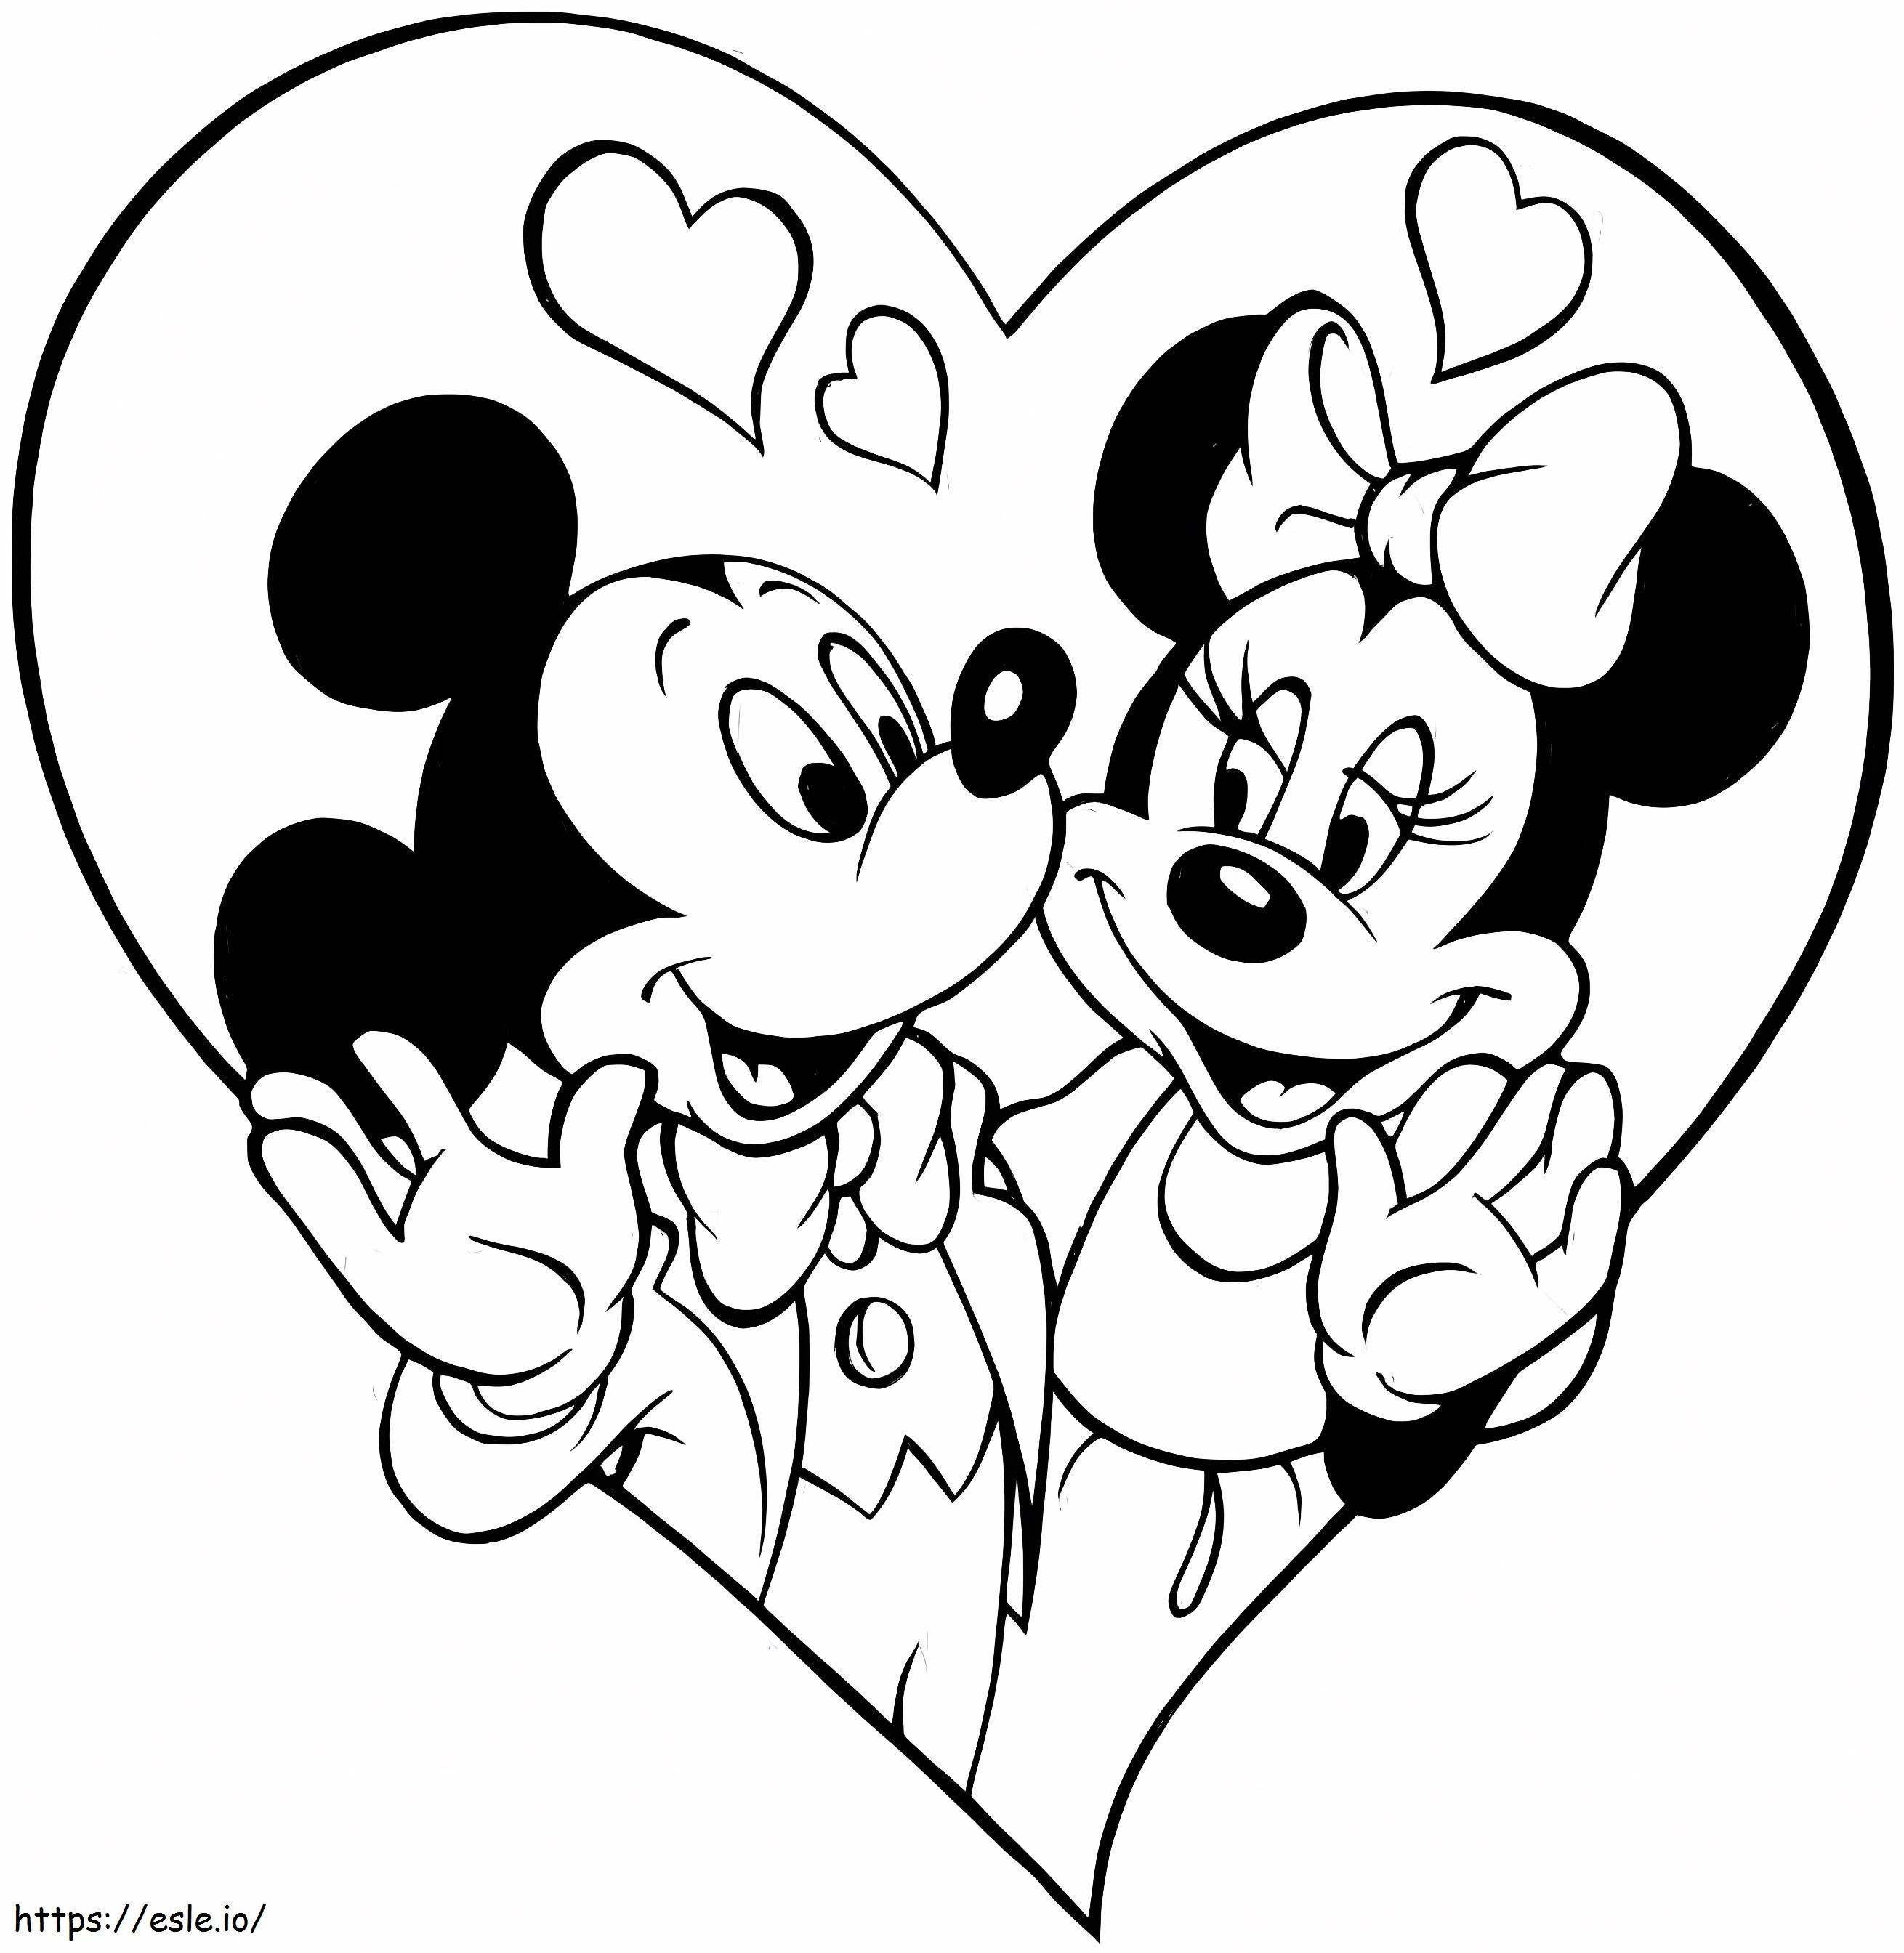 Mickey Mouse Disney Valentine coloring page